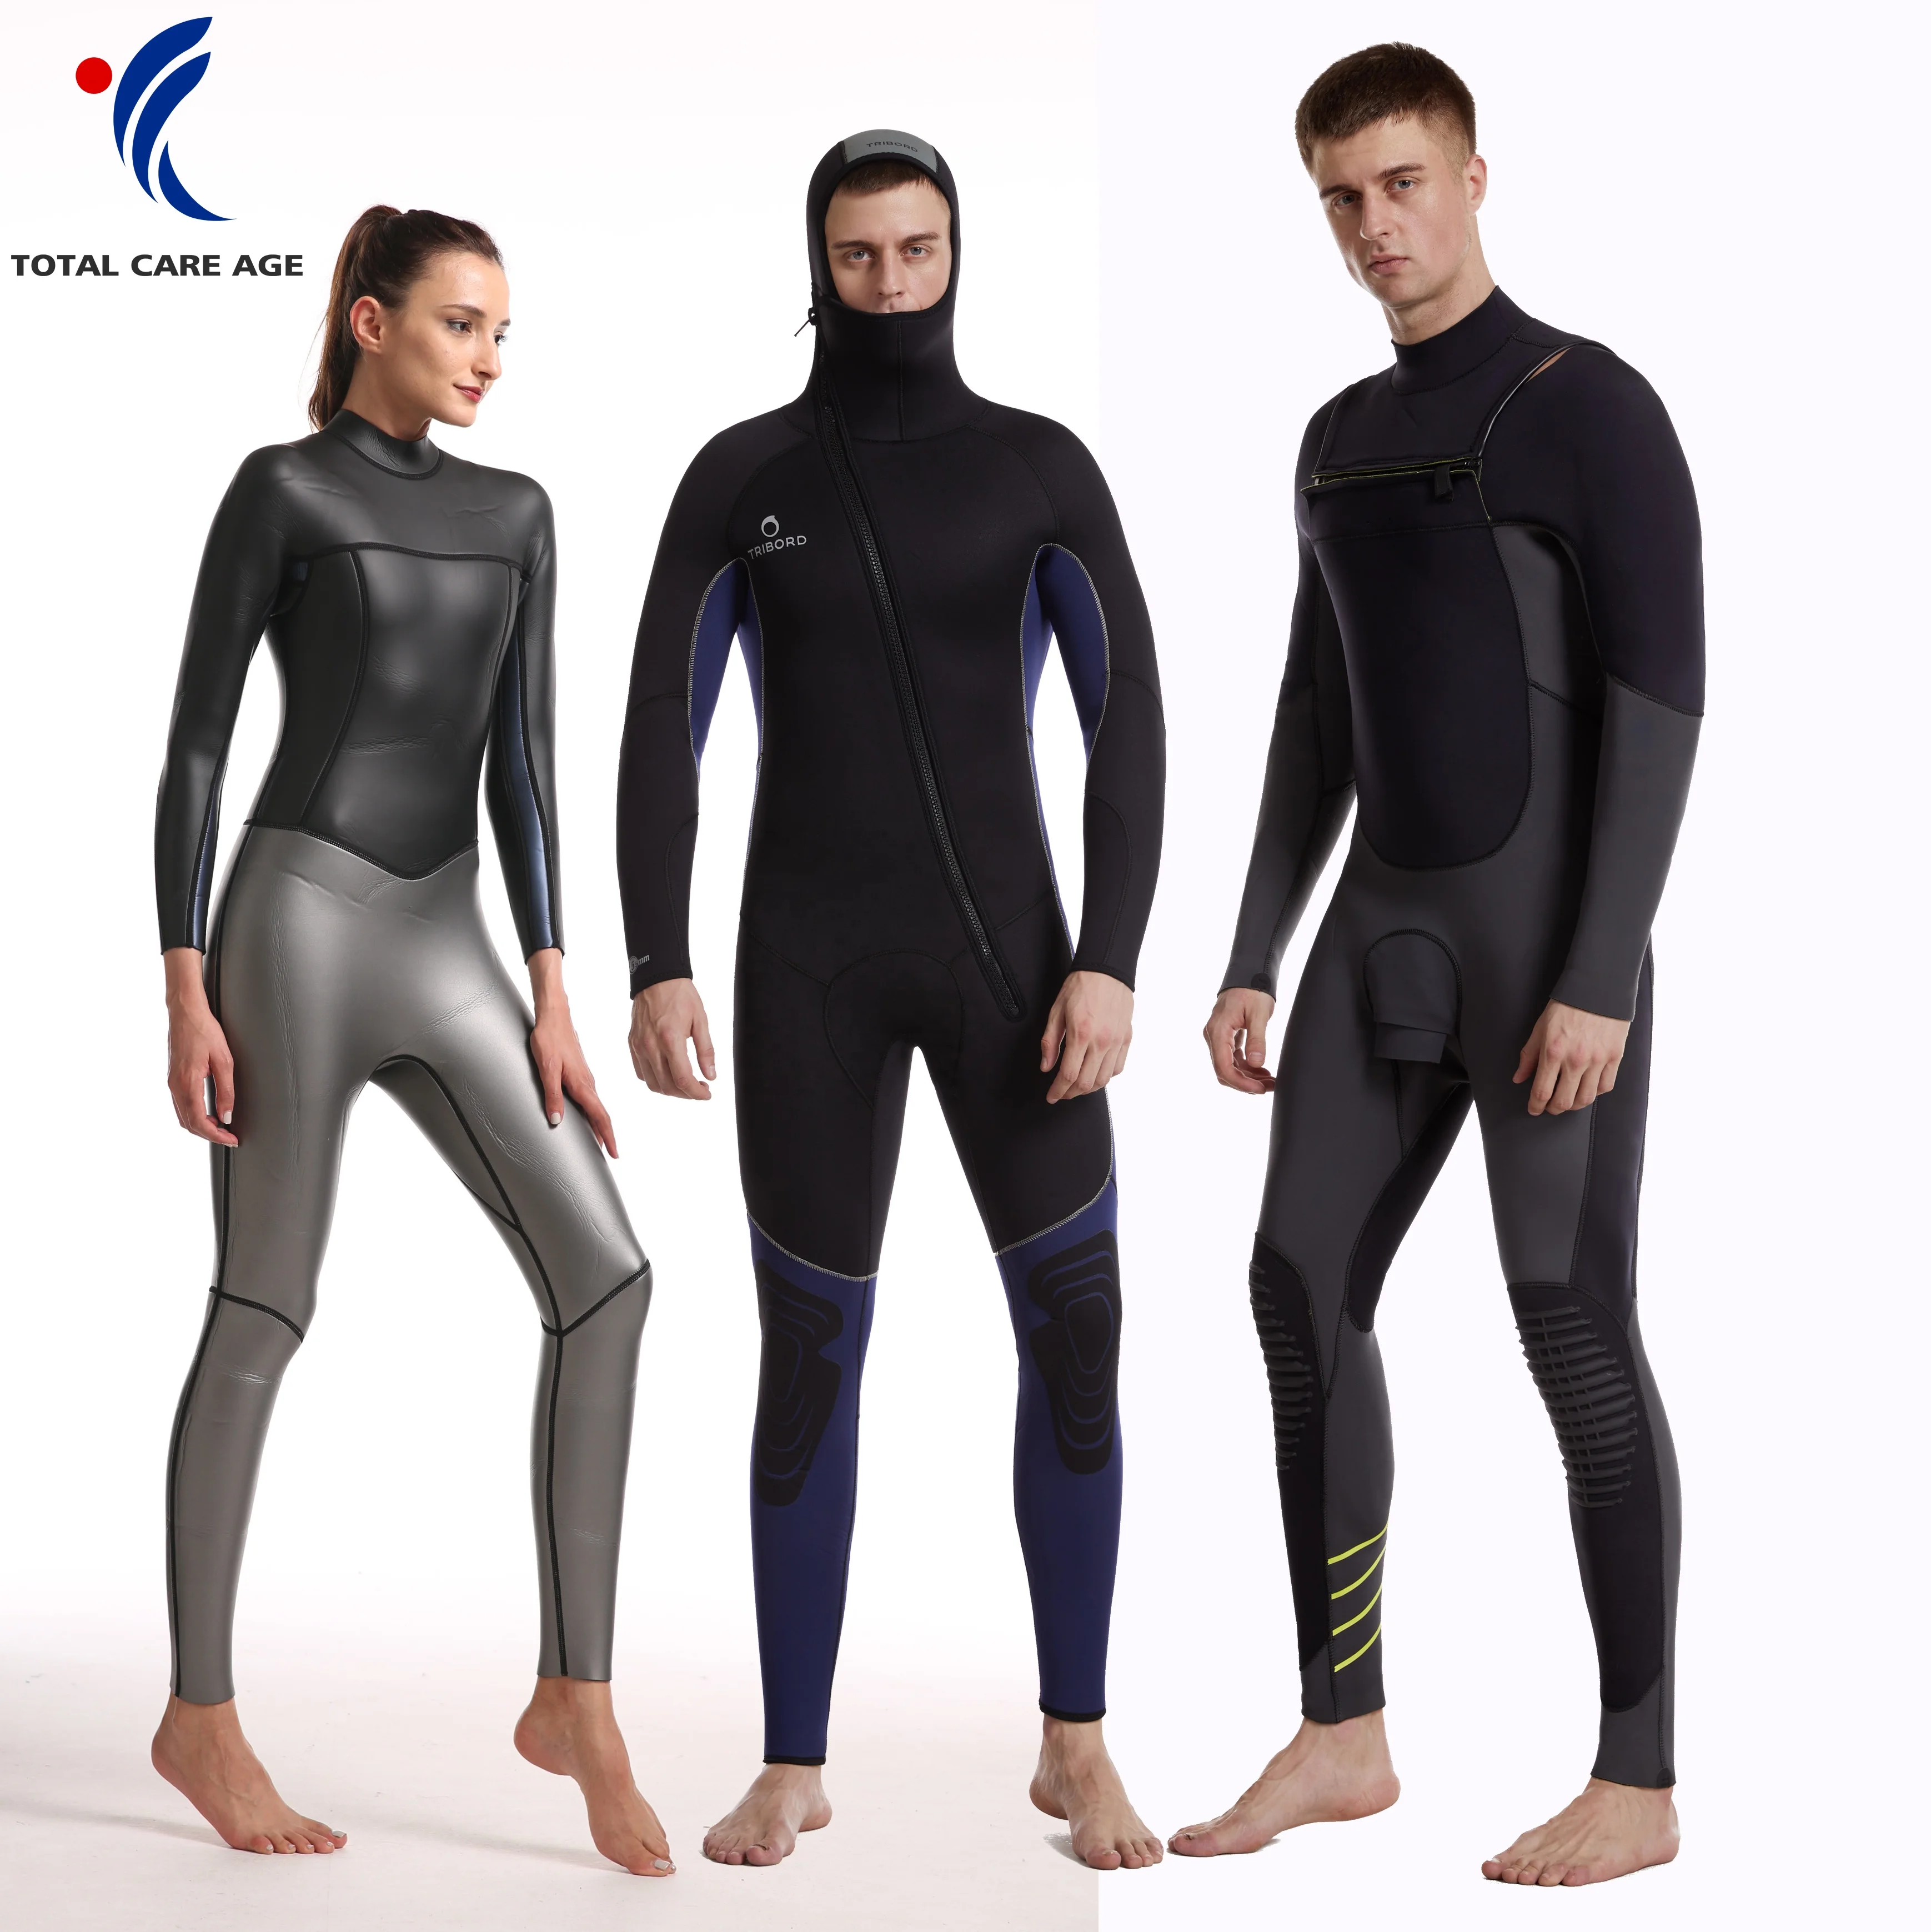 

YIHENG Customized 3mm 5mm 7mm Triathlon Snorkeling Freediving Spearfishing Surfing Diving Wet Suit Smooth Skin Neoprene Wetsuits